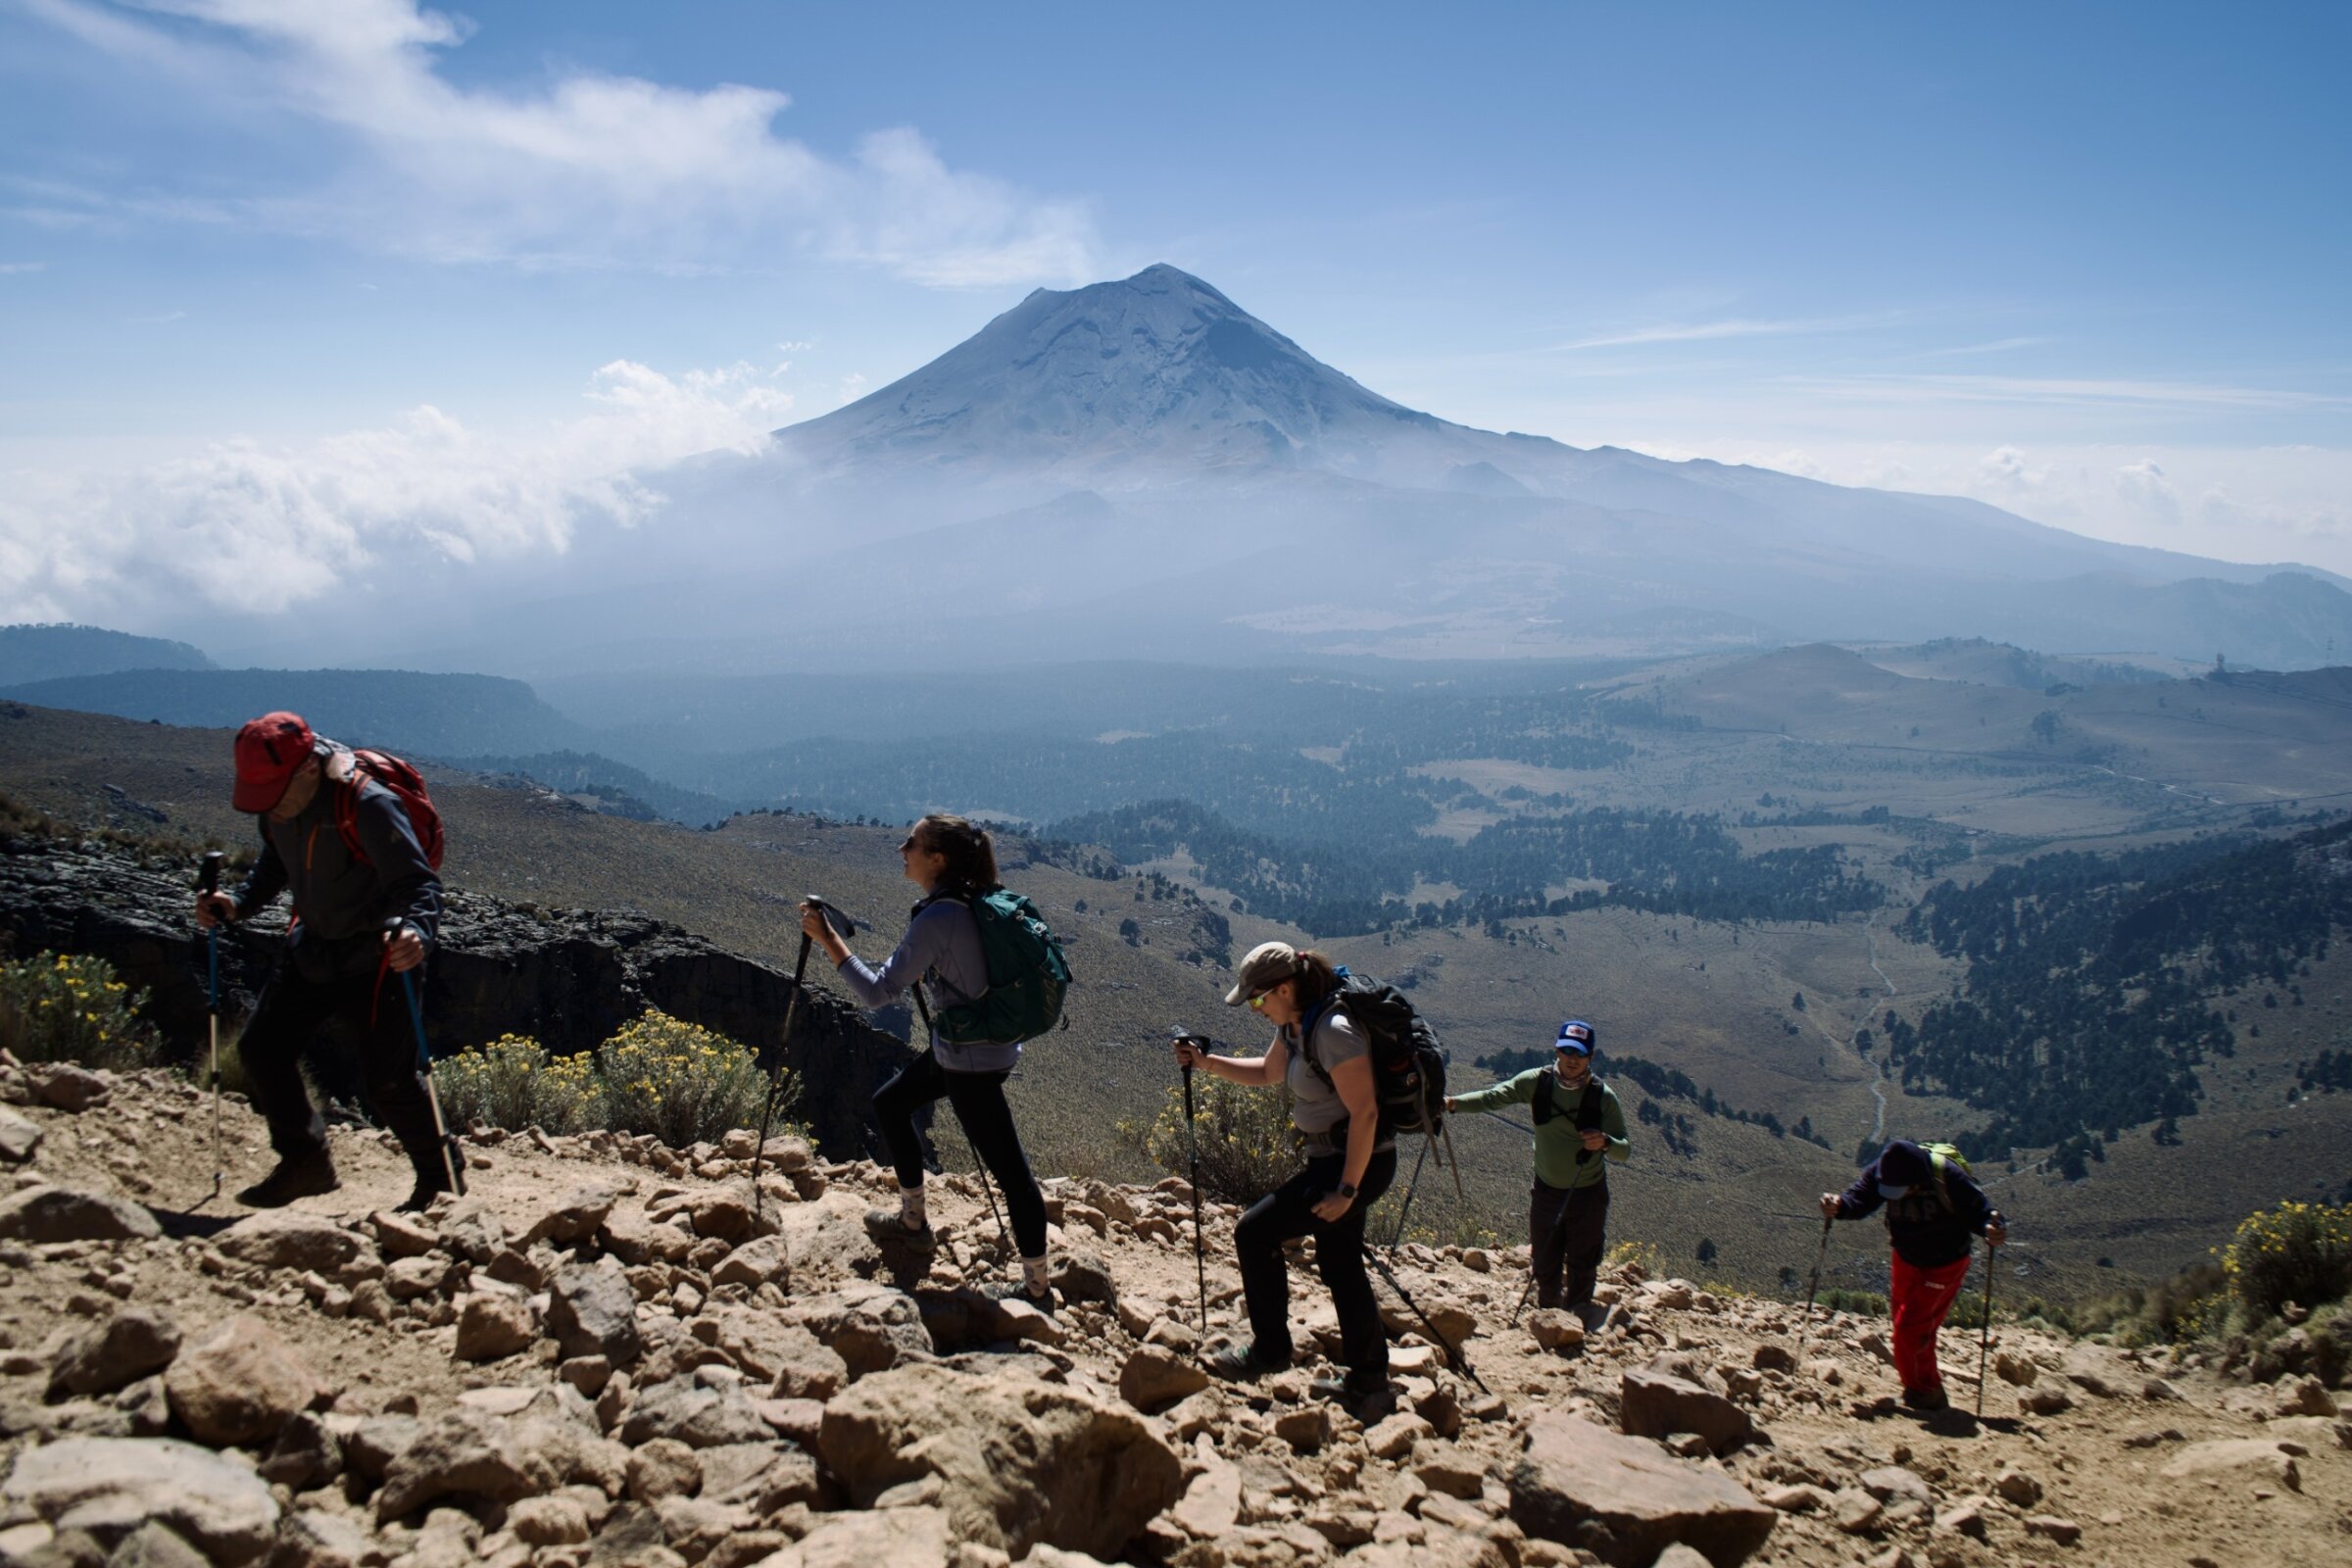 A group of climbers on an acclimatization hike before climbing the Volcanoes of Mexico